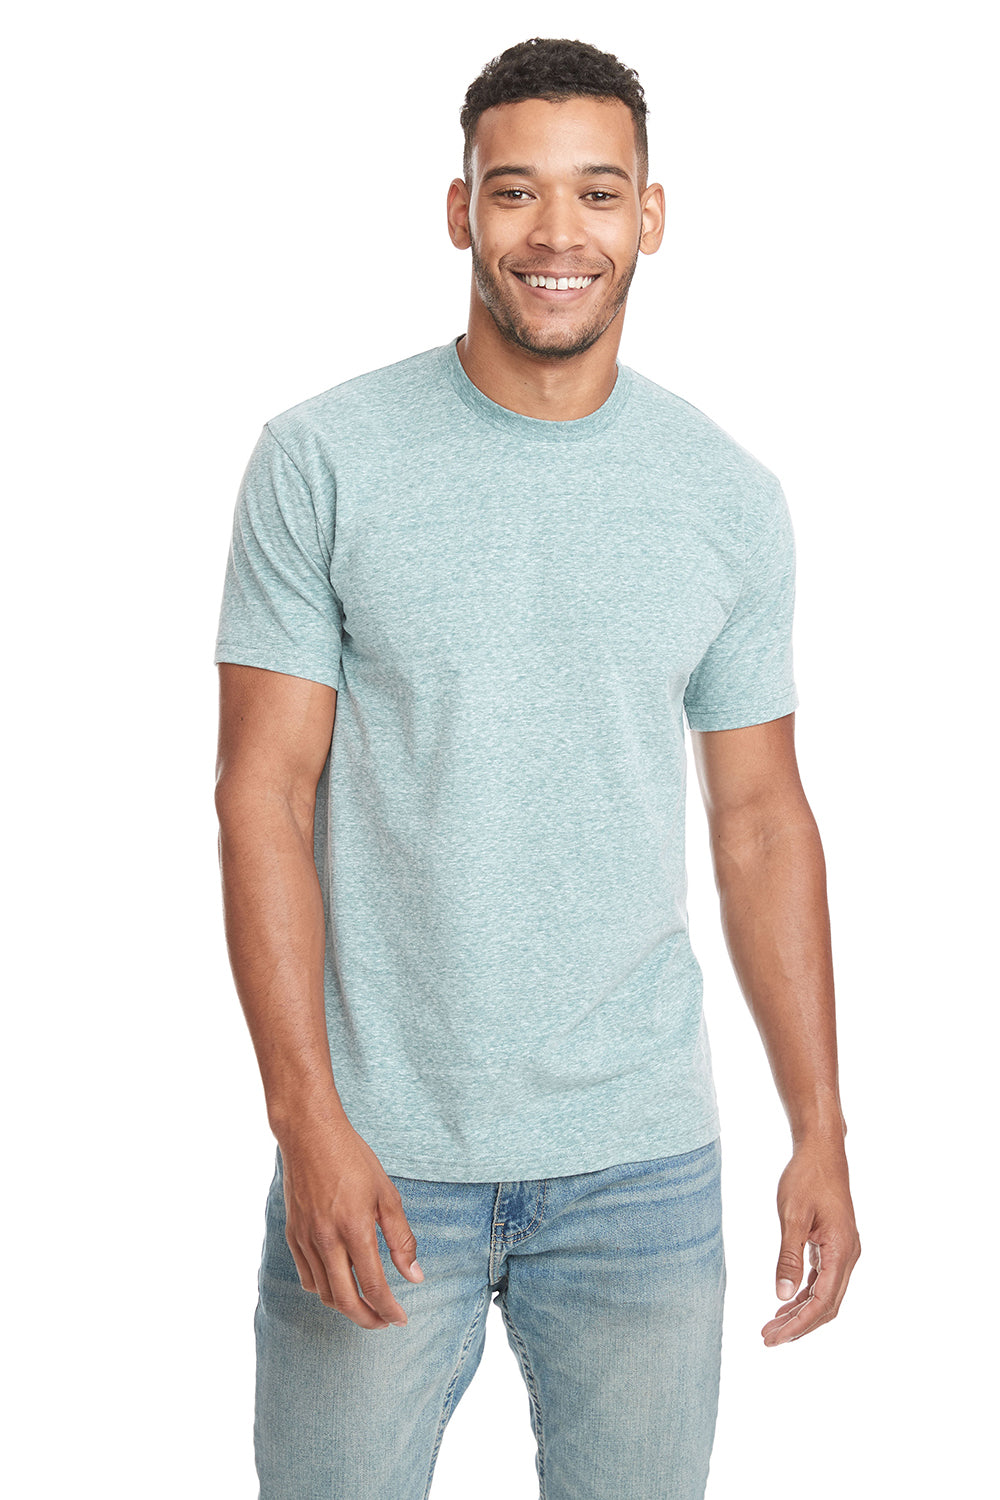 Next Level 6407 Mens Sueded Short Sleeve Crewneck T-Shirt Heather Green Front